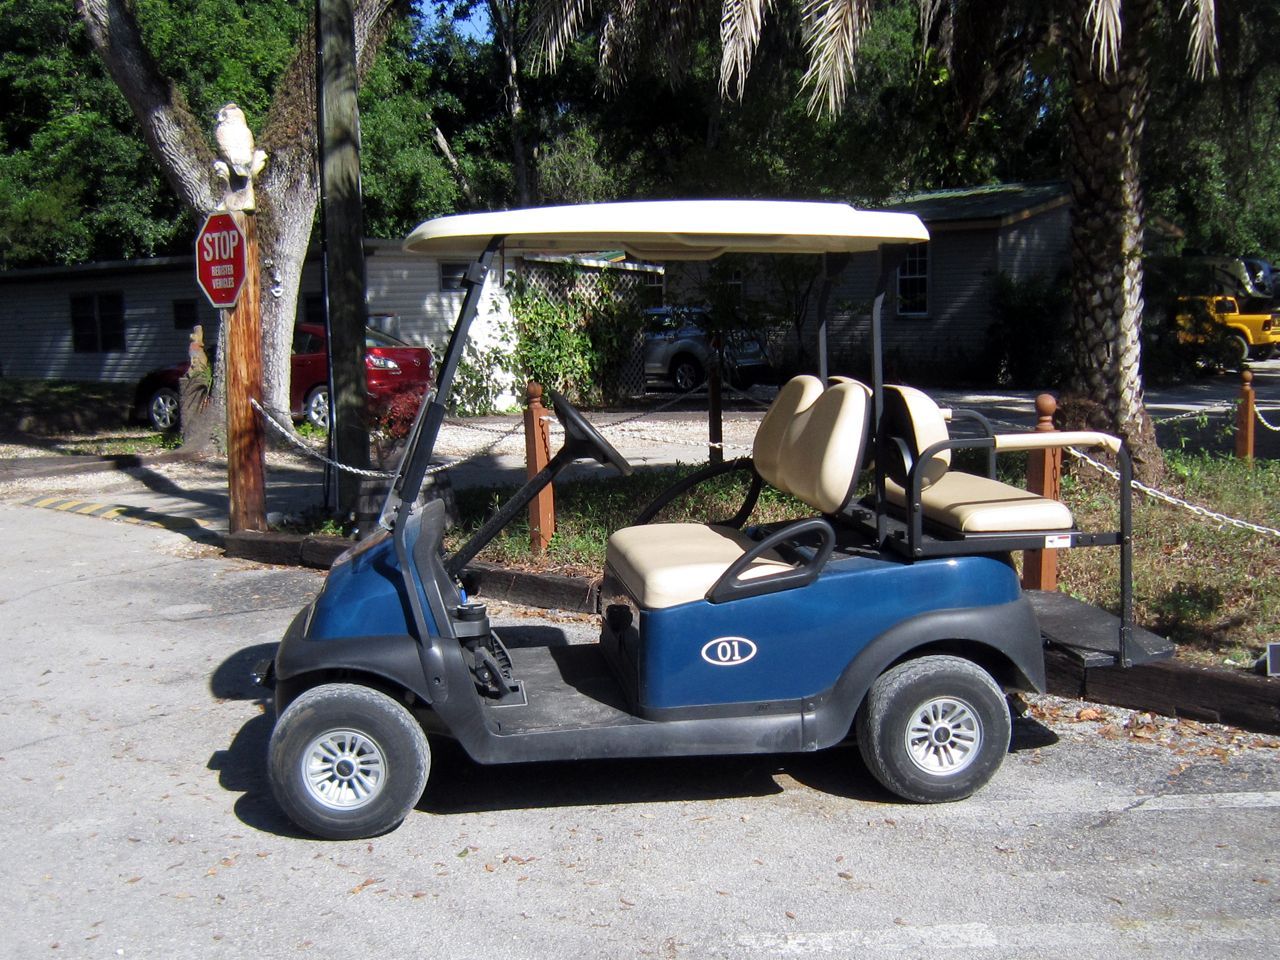 a blue golf cart is parked in front of a stop sign